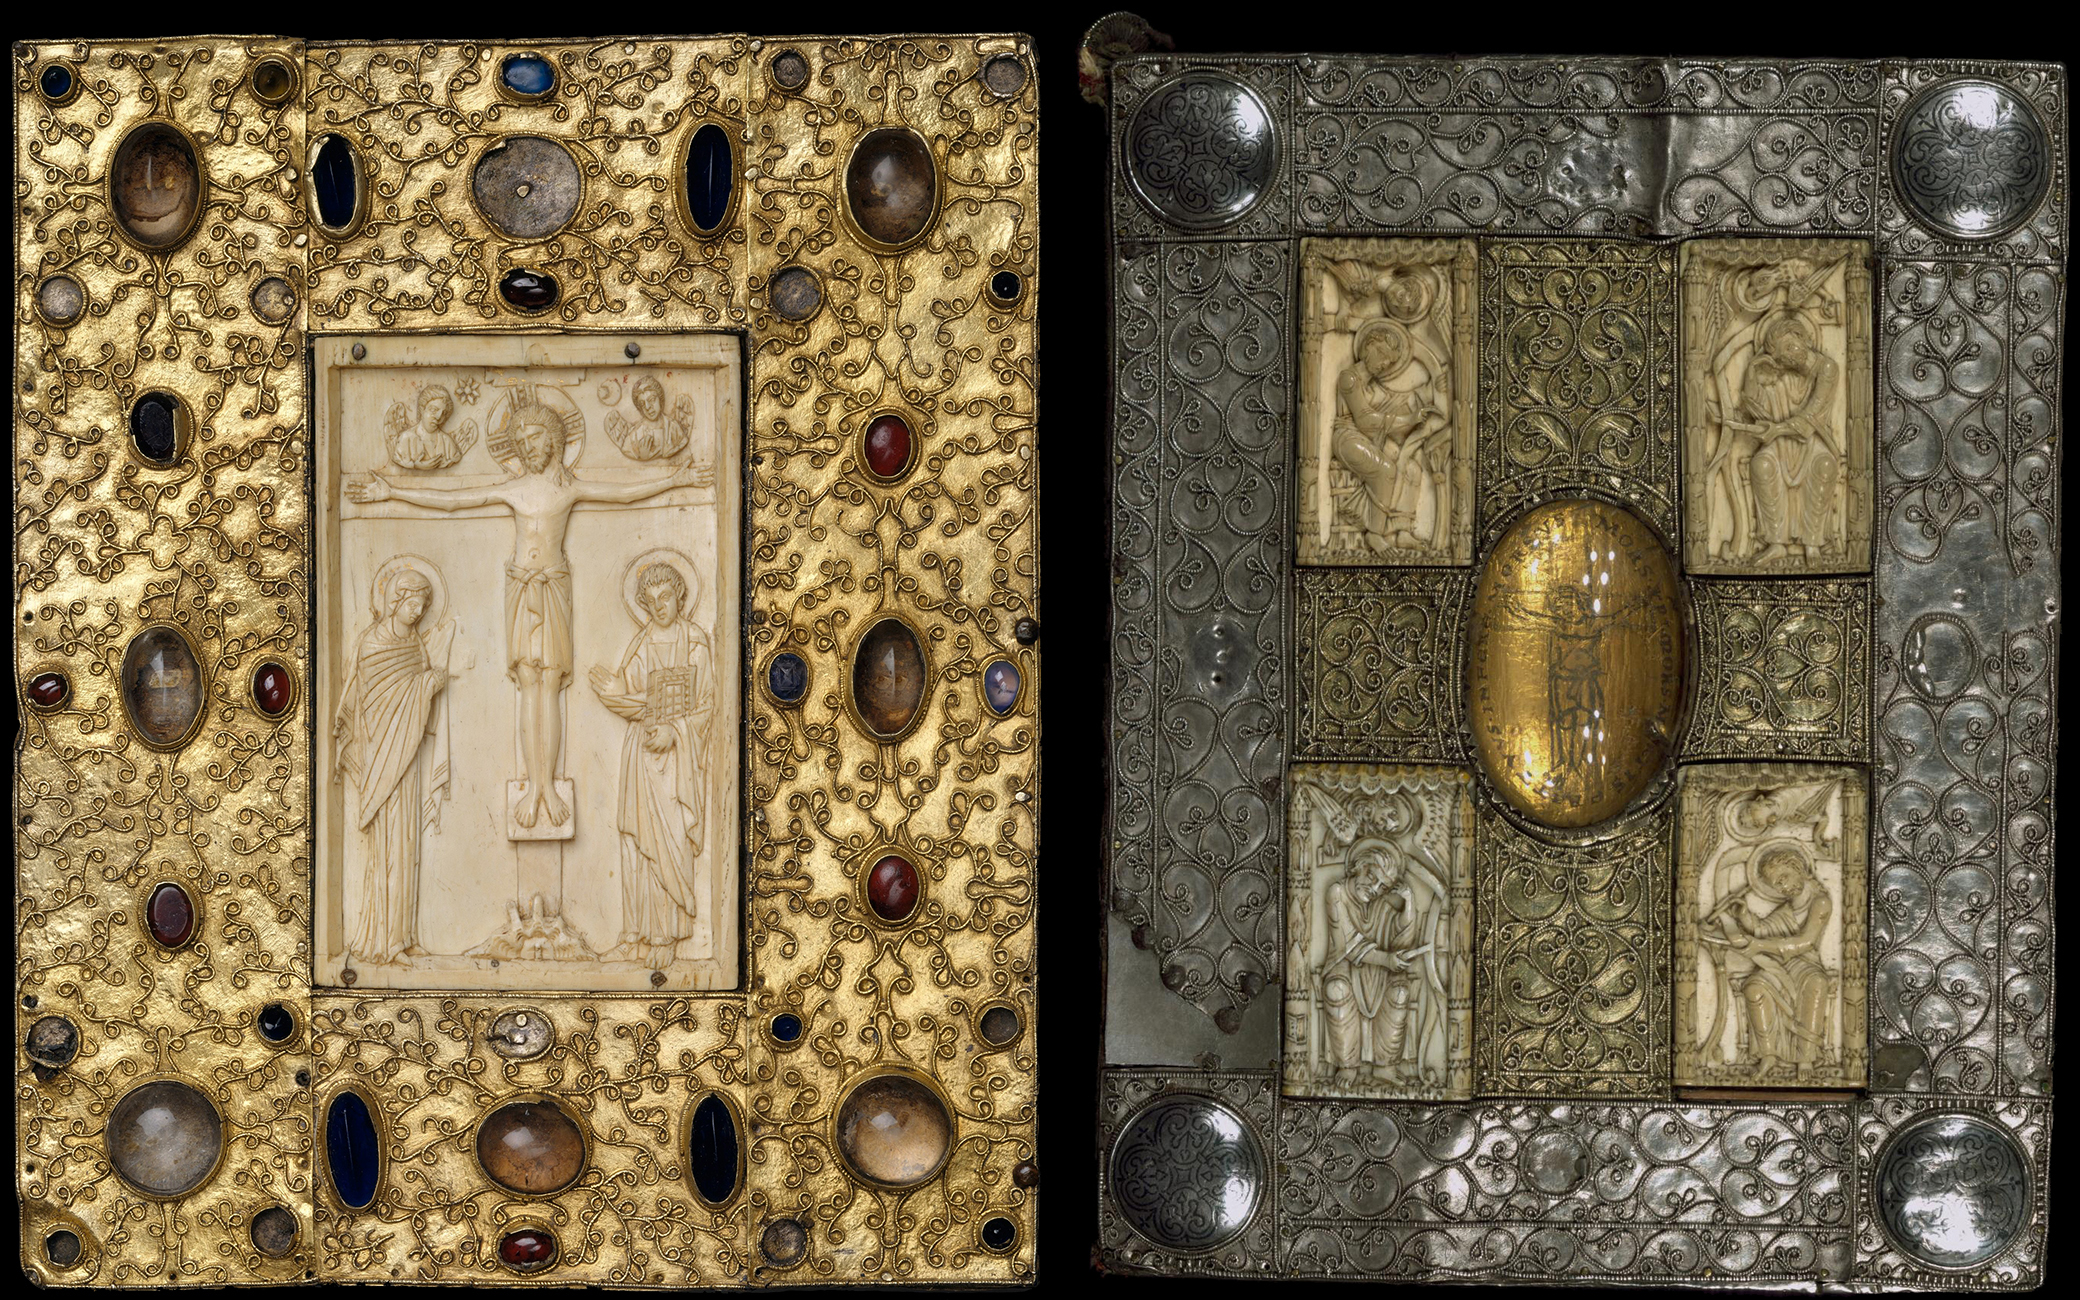 Book cover with Byzantine icon of the Crucifixion produced for the nunnery of Santa Cruz de la Serós, Spain, c. 1085; treasure binding with the Evangelists and the Crucifixion by Othlon of Regensburg, c. 1030–50.